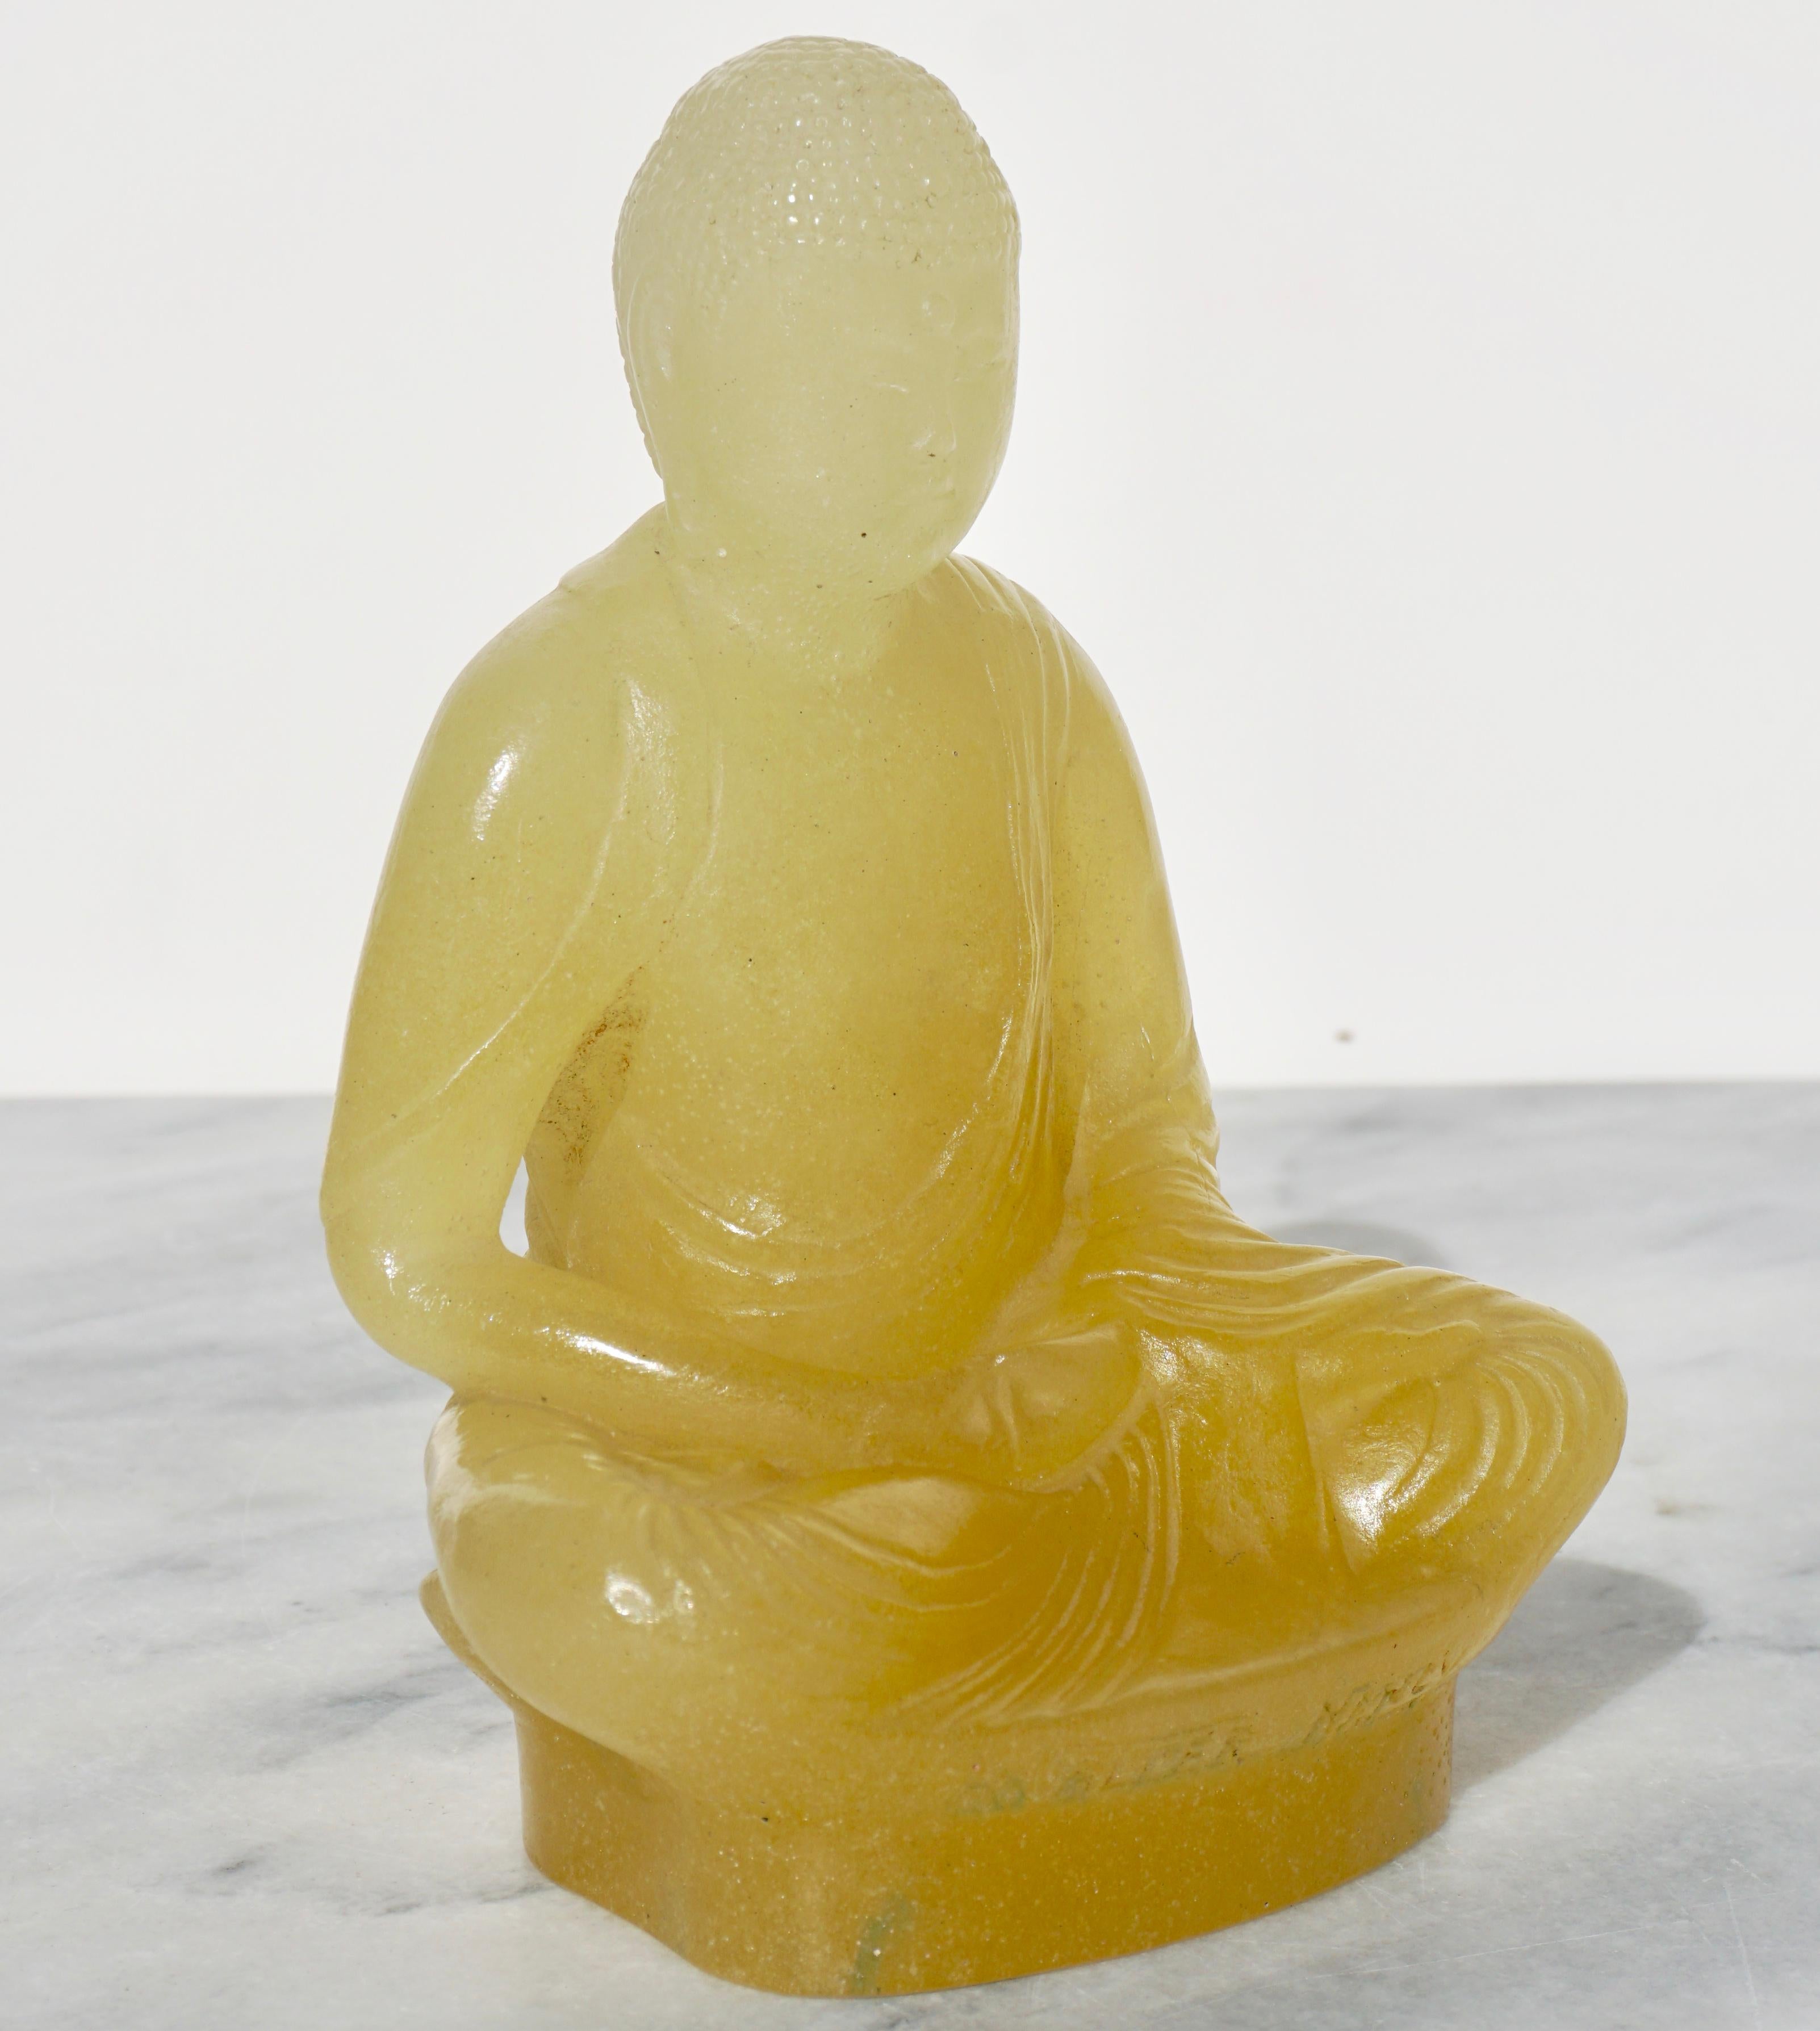 Amalric Walter (français, 1870-1959)

A wonderful energetic Glass or Chrystal Shakyamuni Buddha by Almeric Walter from the Art Nouveau, Art Deco period circa 1920. These Buddha figures are rare as most Walter Pate de Verre models. Why copper or